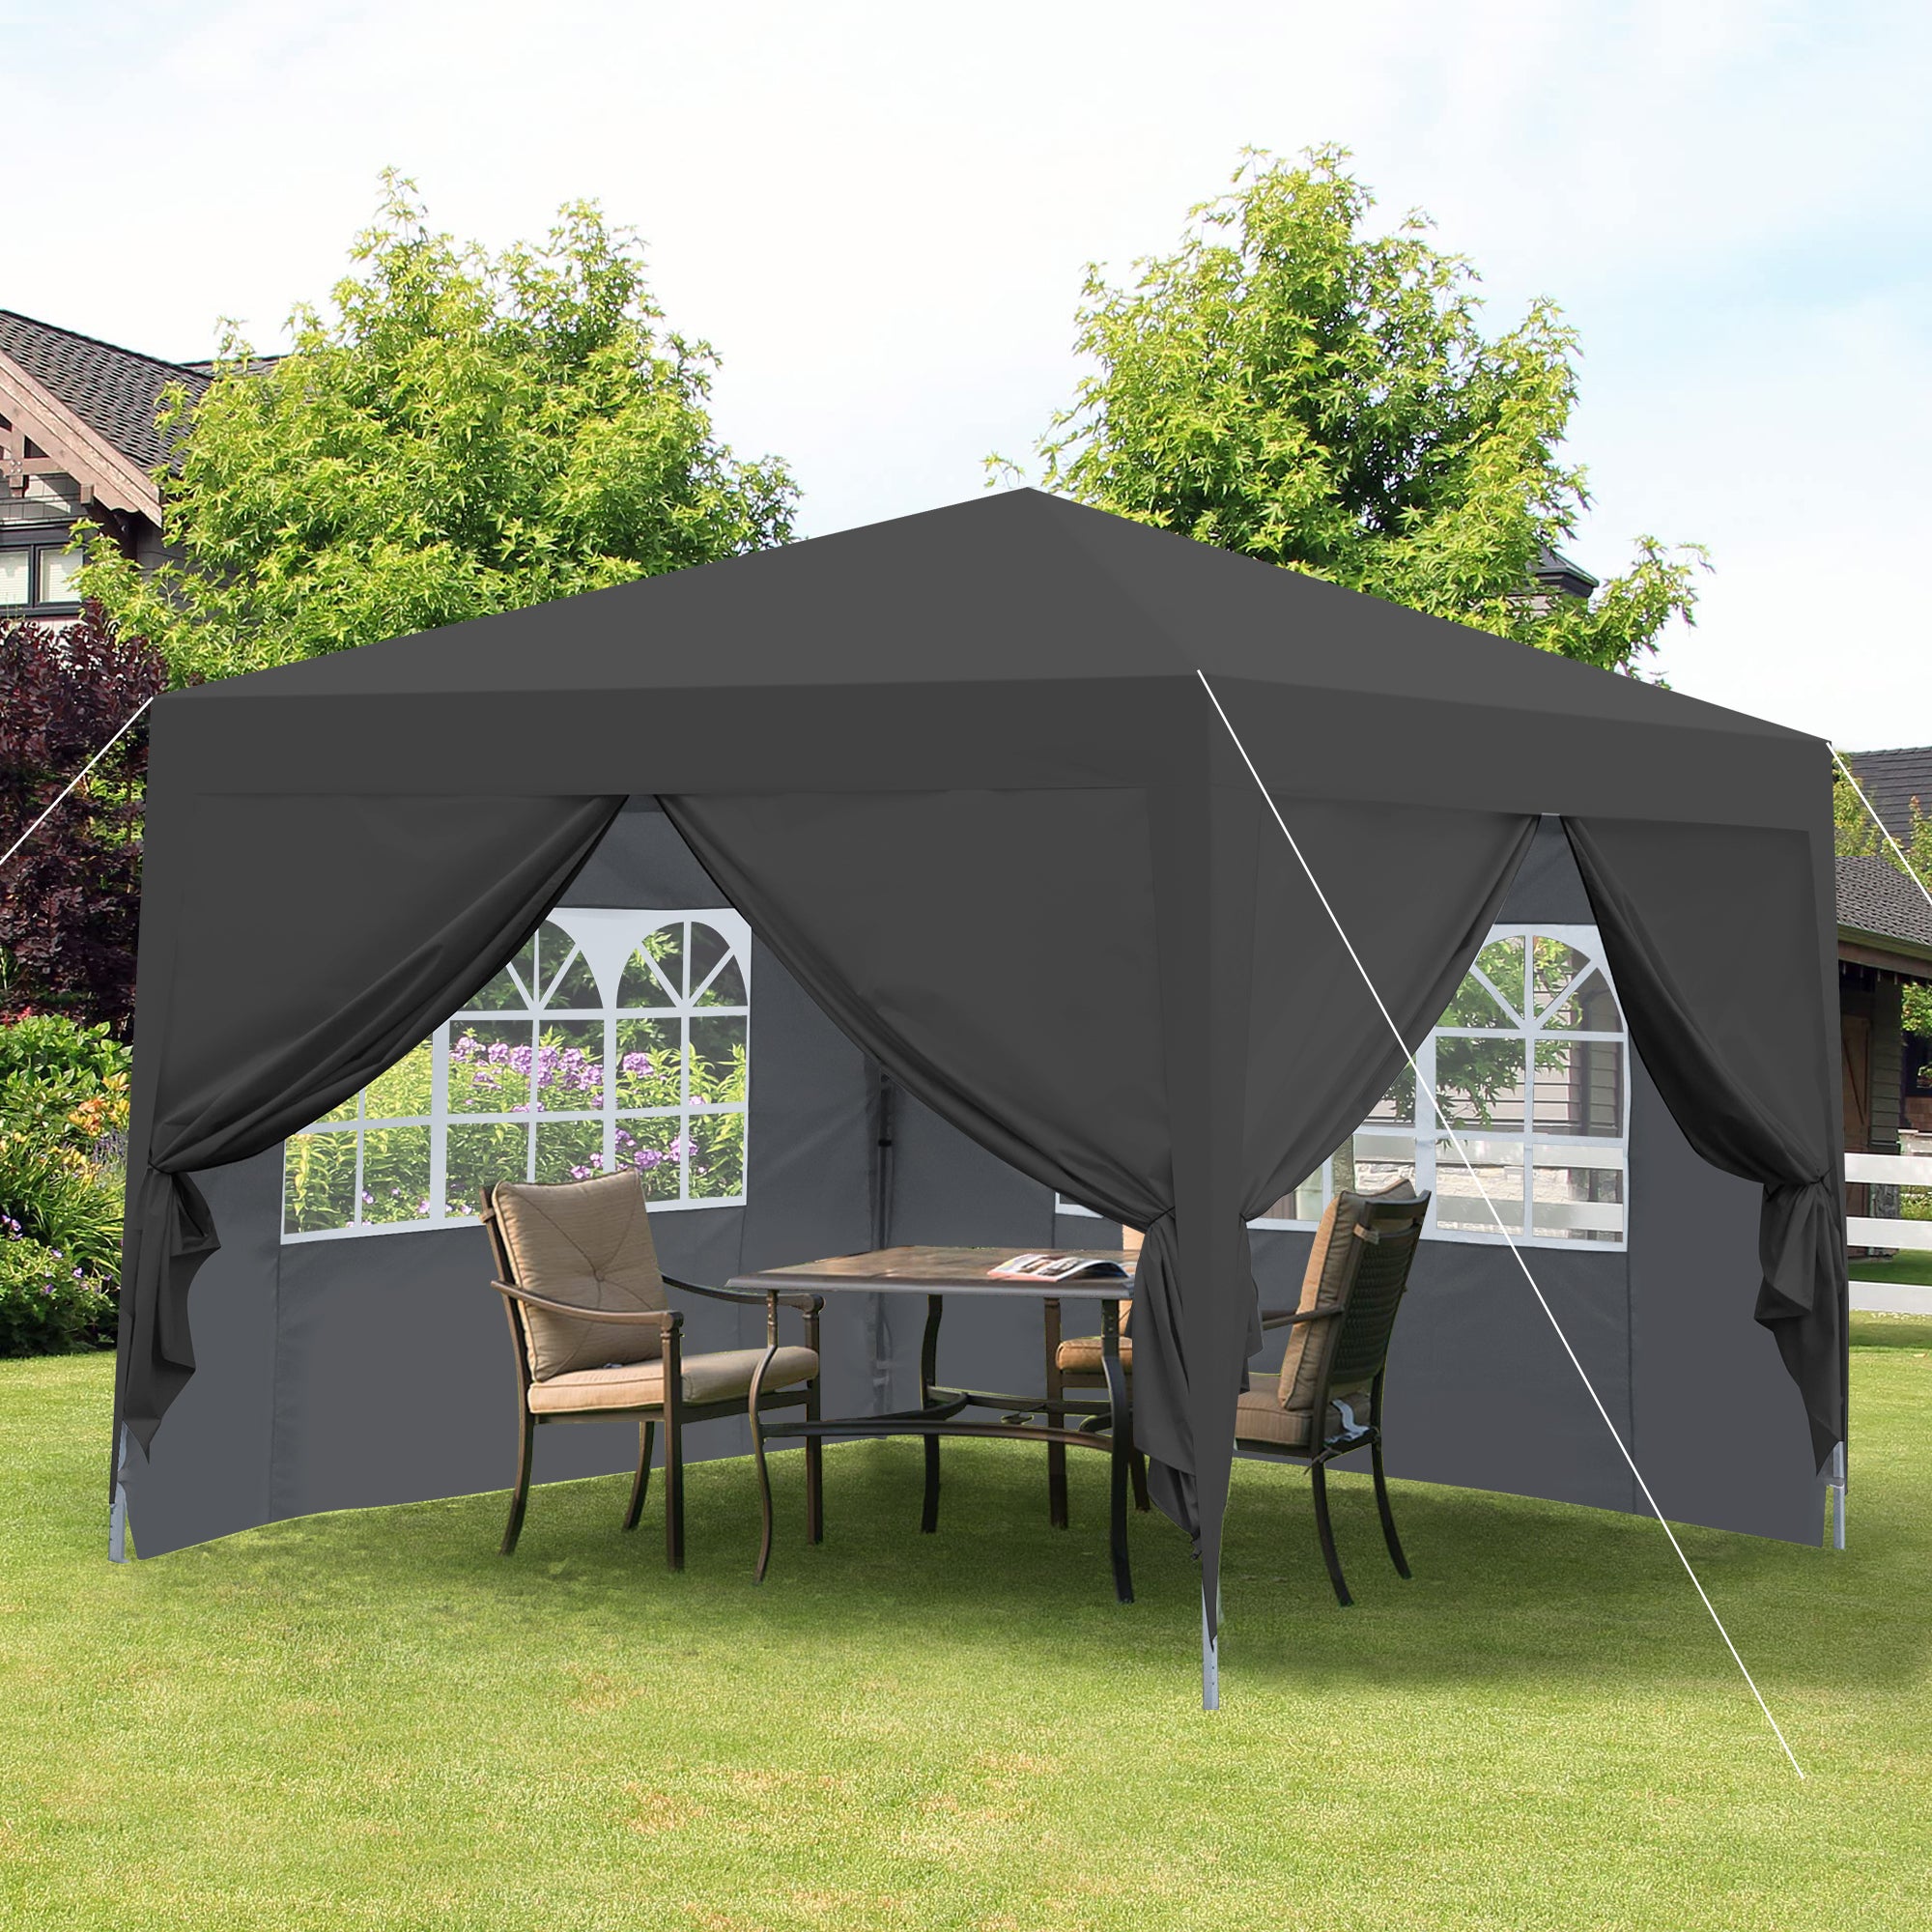 🆓🚛 Outdoor 10x 10Ft Pop Up Gazebo Canopy Tent, Removable Sidewall with Zipper, 2pcs Sidewall with Windows, with 4pcs Weight Sand Bags & Carry Bag, Black